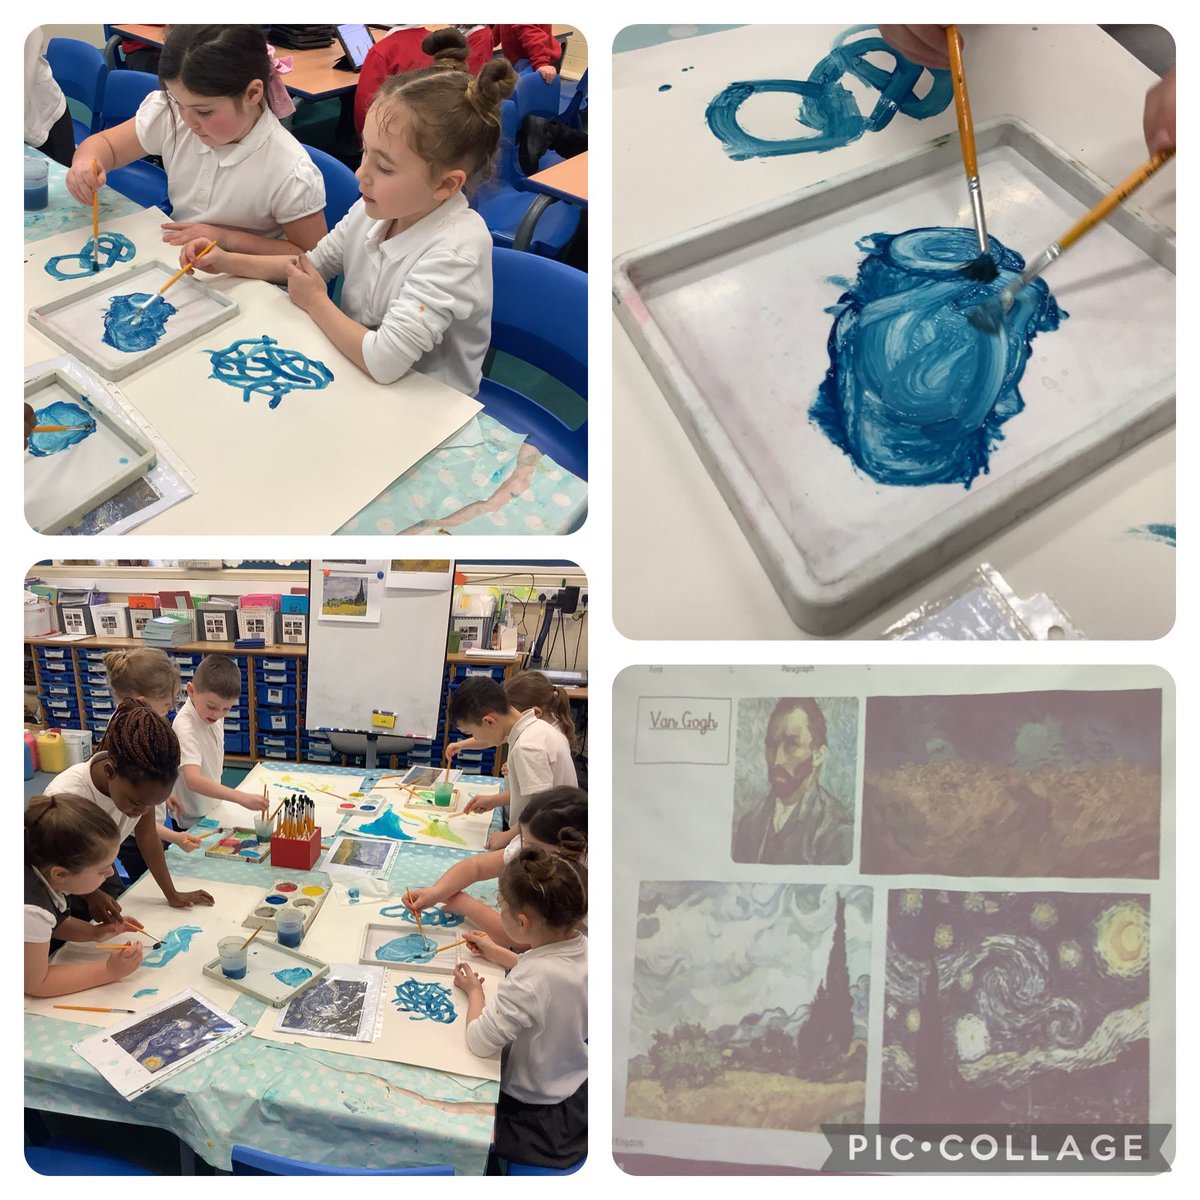 We have experimented with different tools and brush marks to be inventive in our use of colour. @FallaParkSchool @Miss_Carr_Falla @MrsMcMillanFP